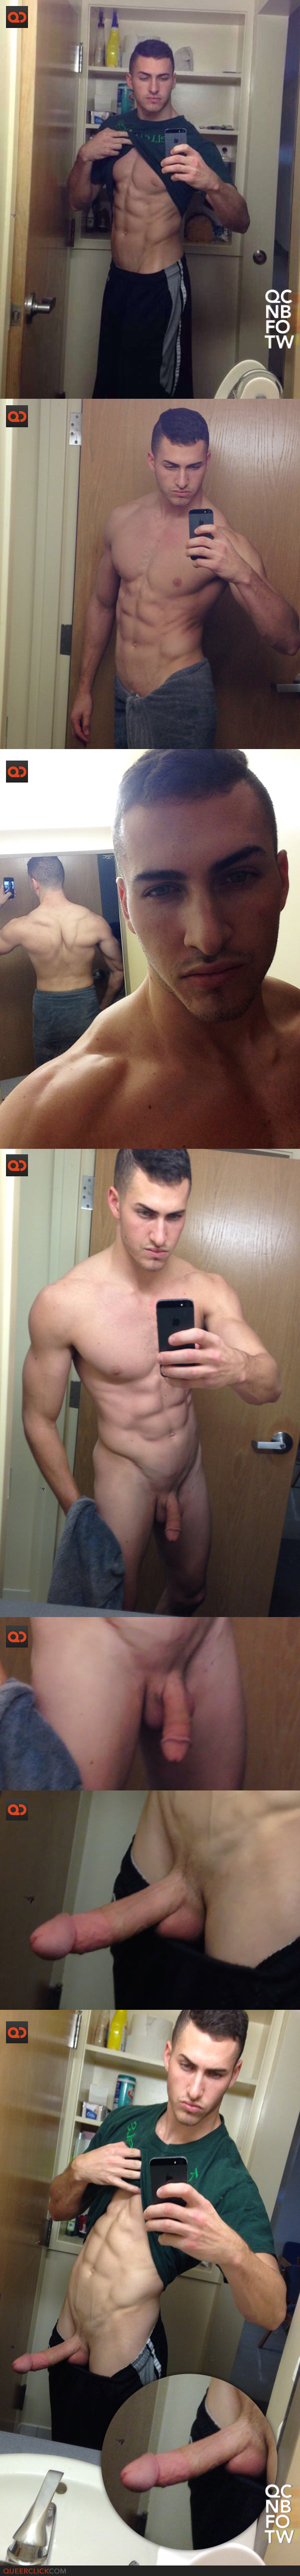 nude_bf_of_the_week-ripped_hunk-collage